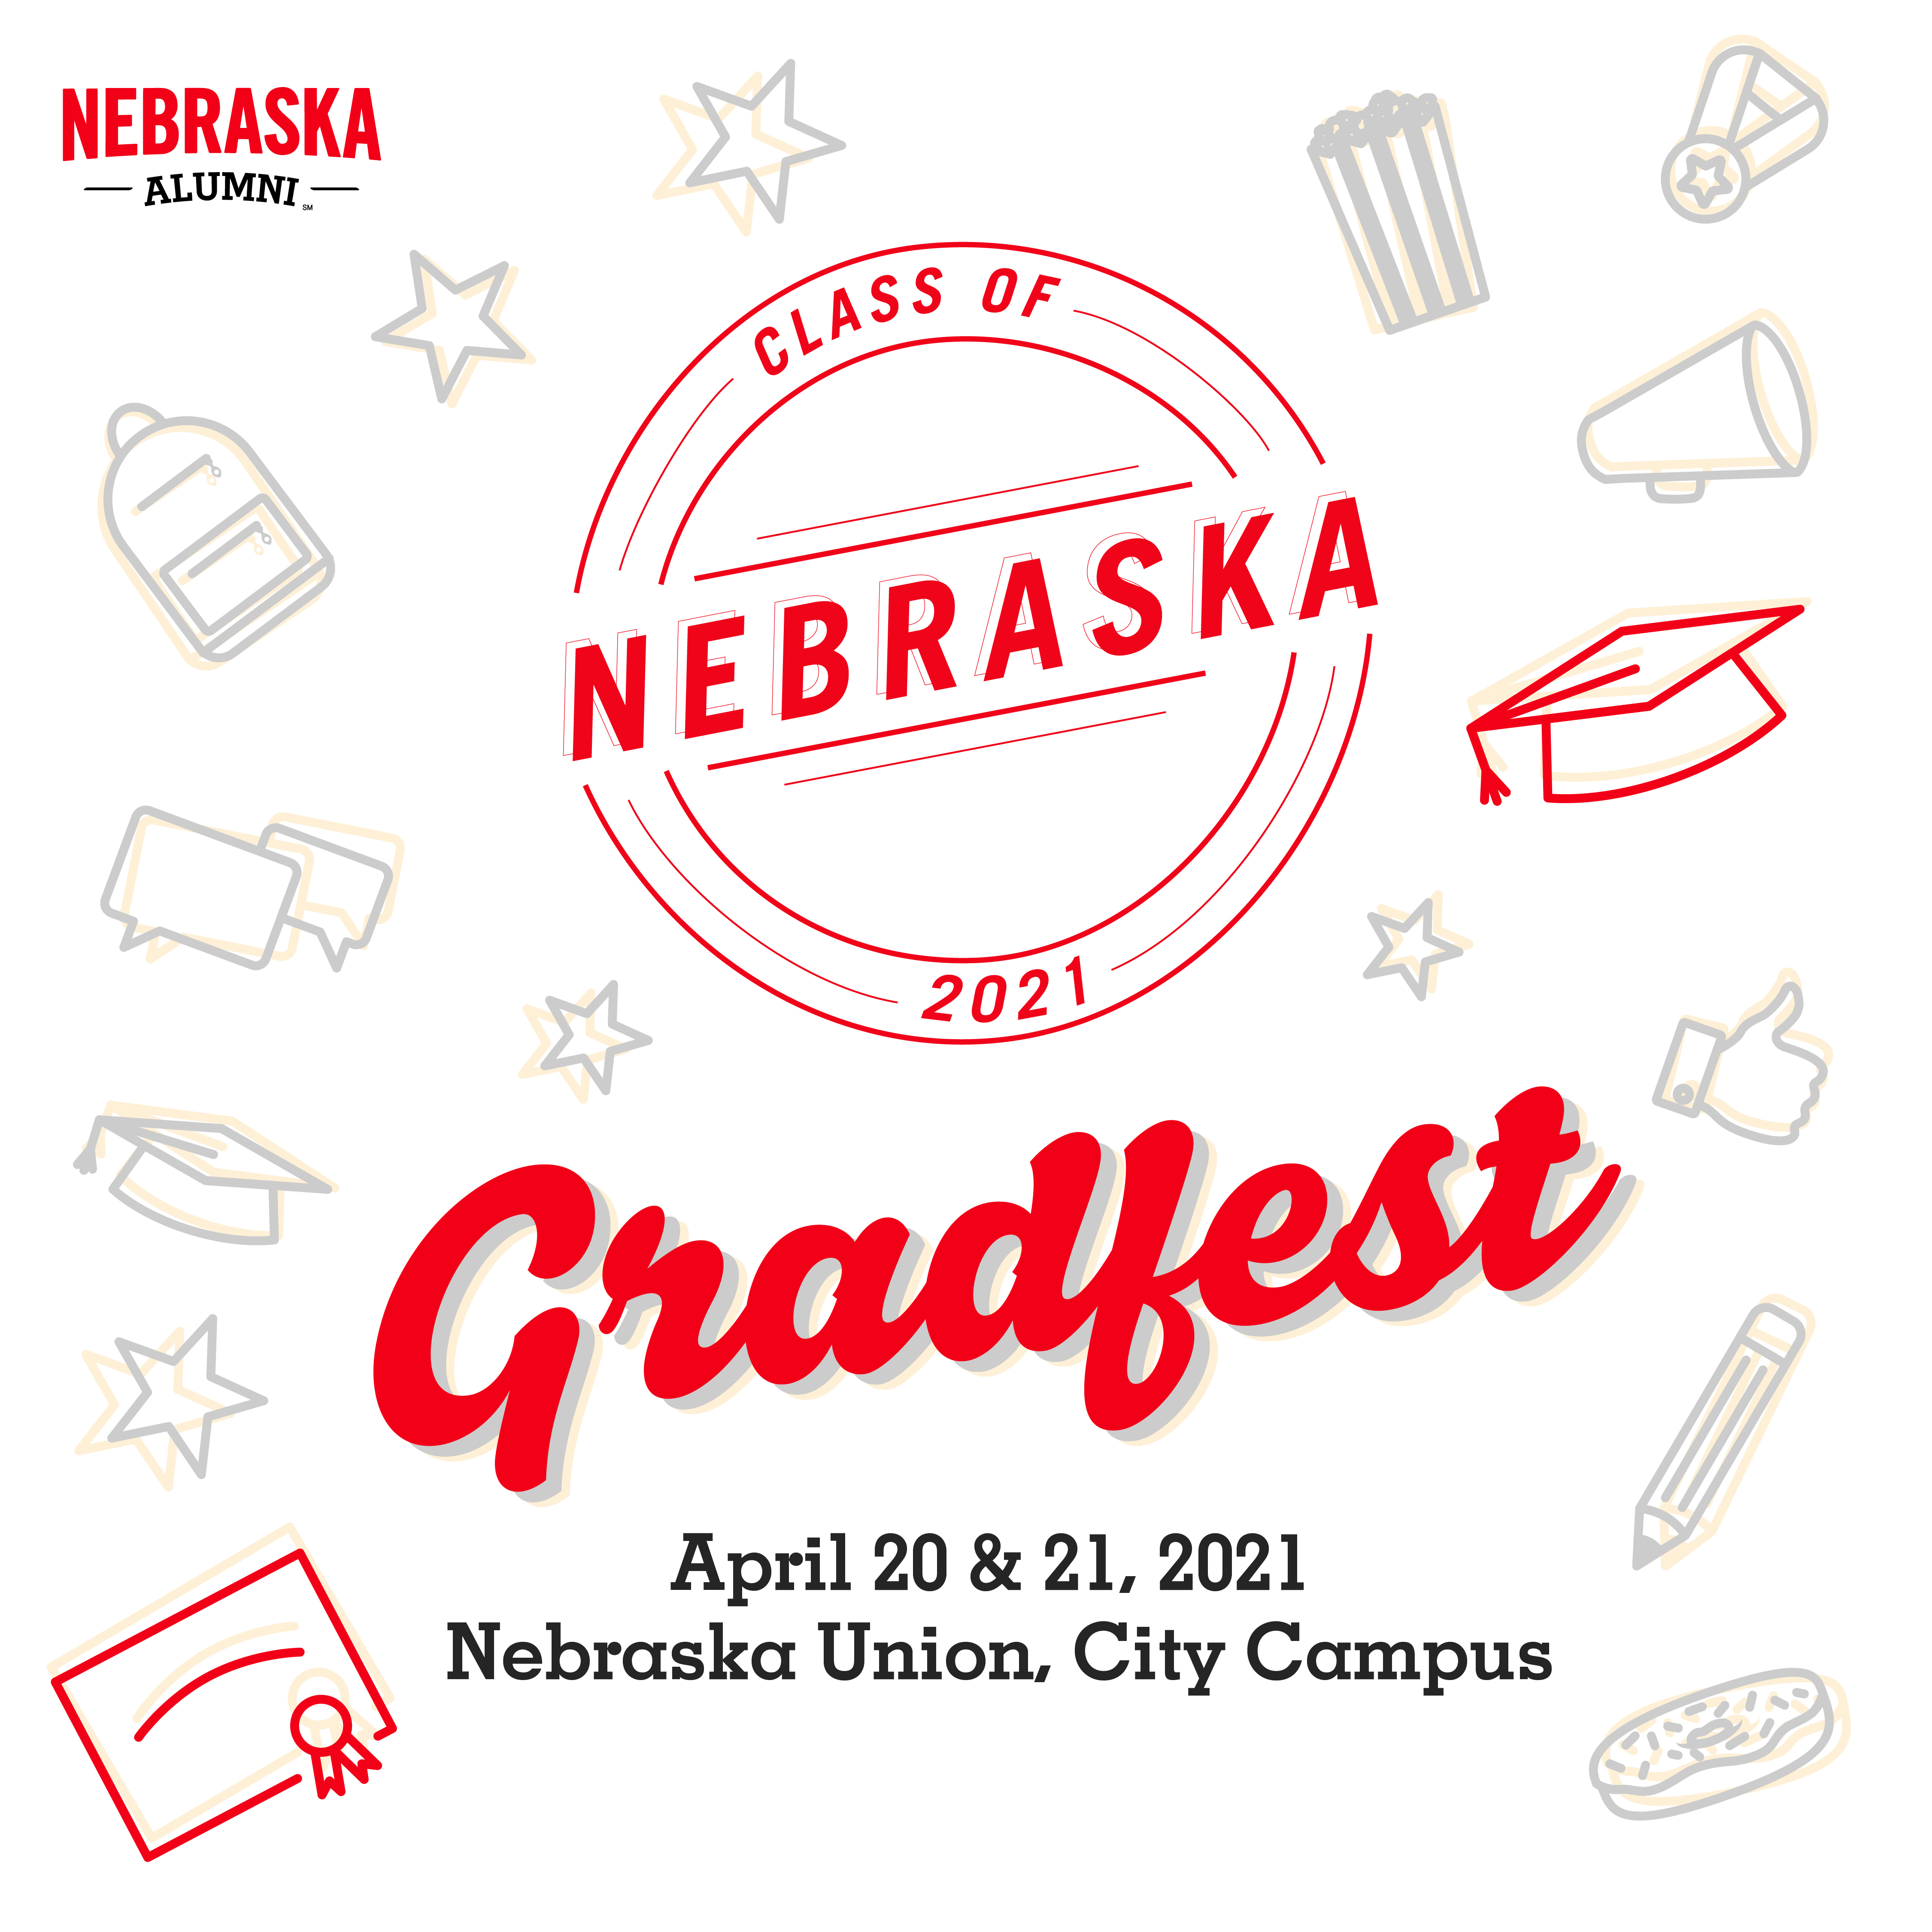 Gradfest to be held April 20 & 21 at City Campus Union